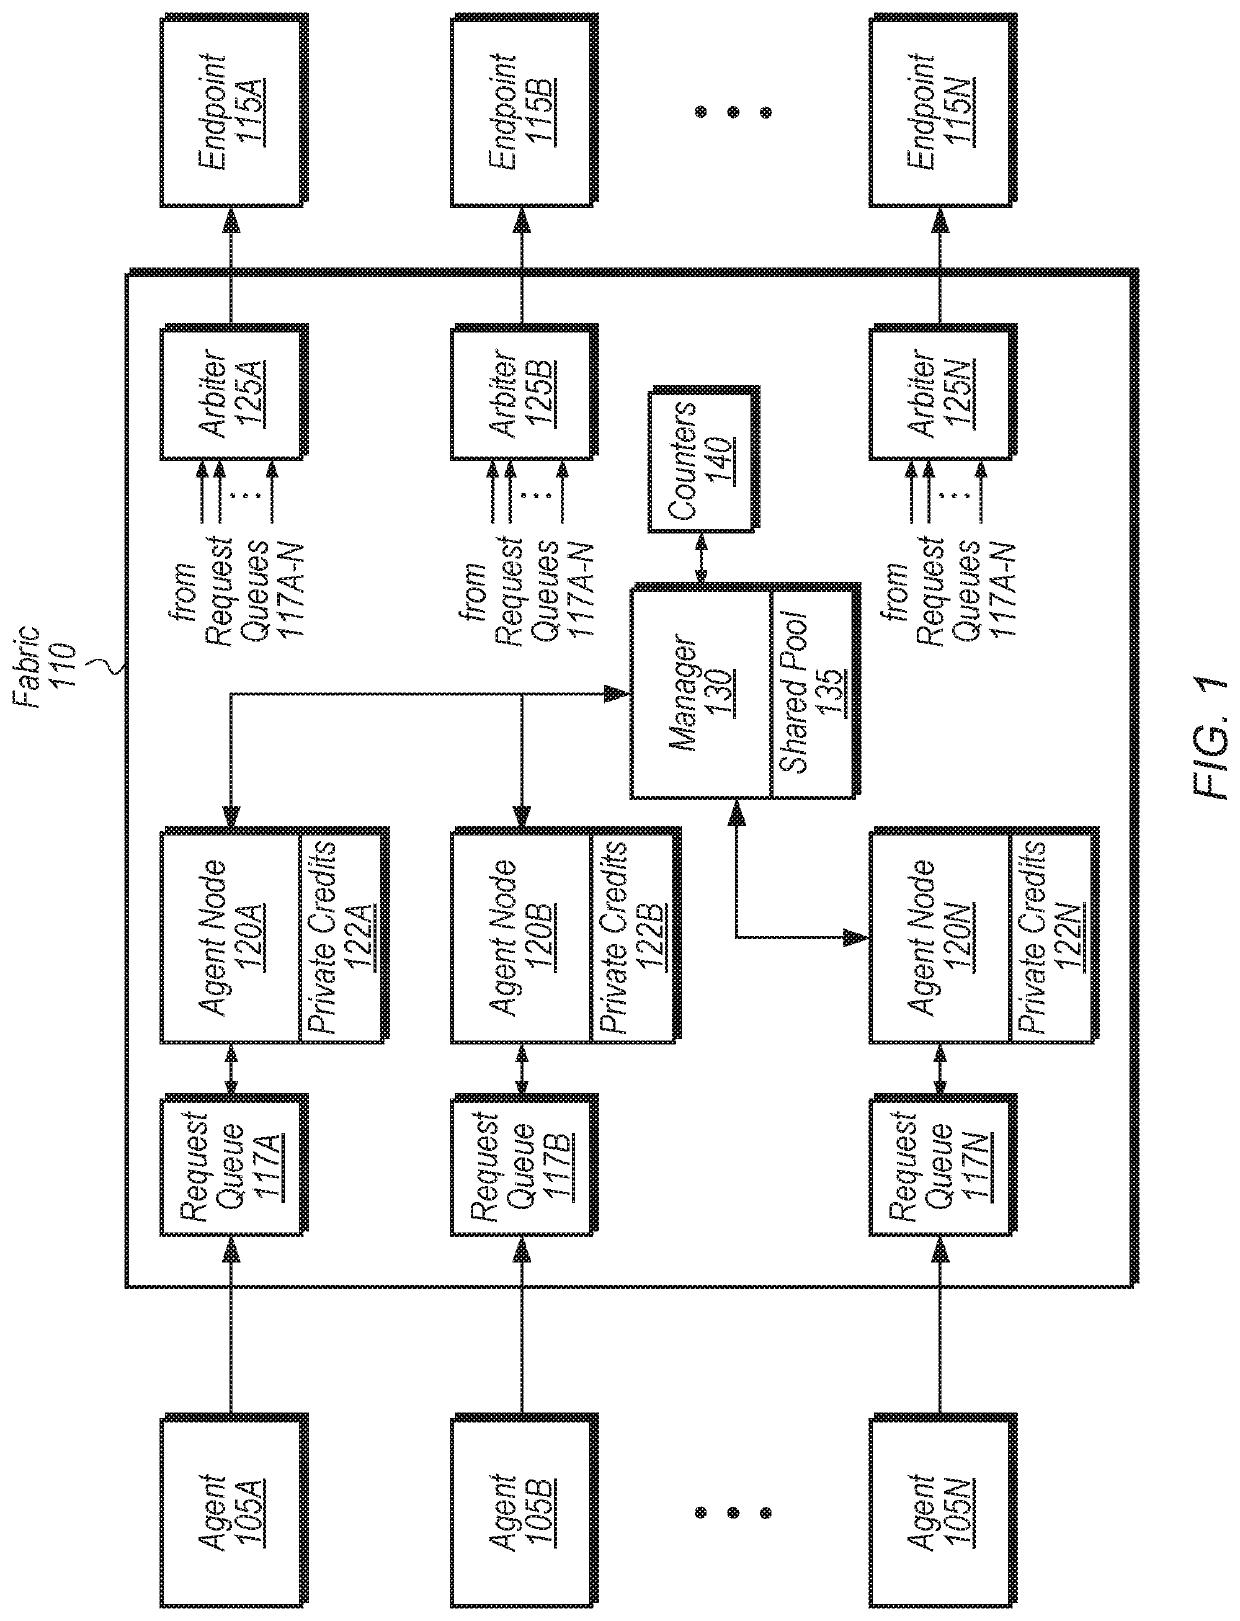 Systems and methods to control bandwidth through shared transaction limits